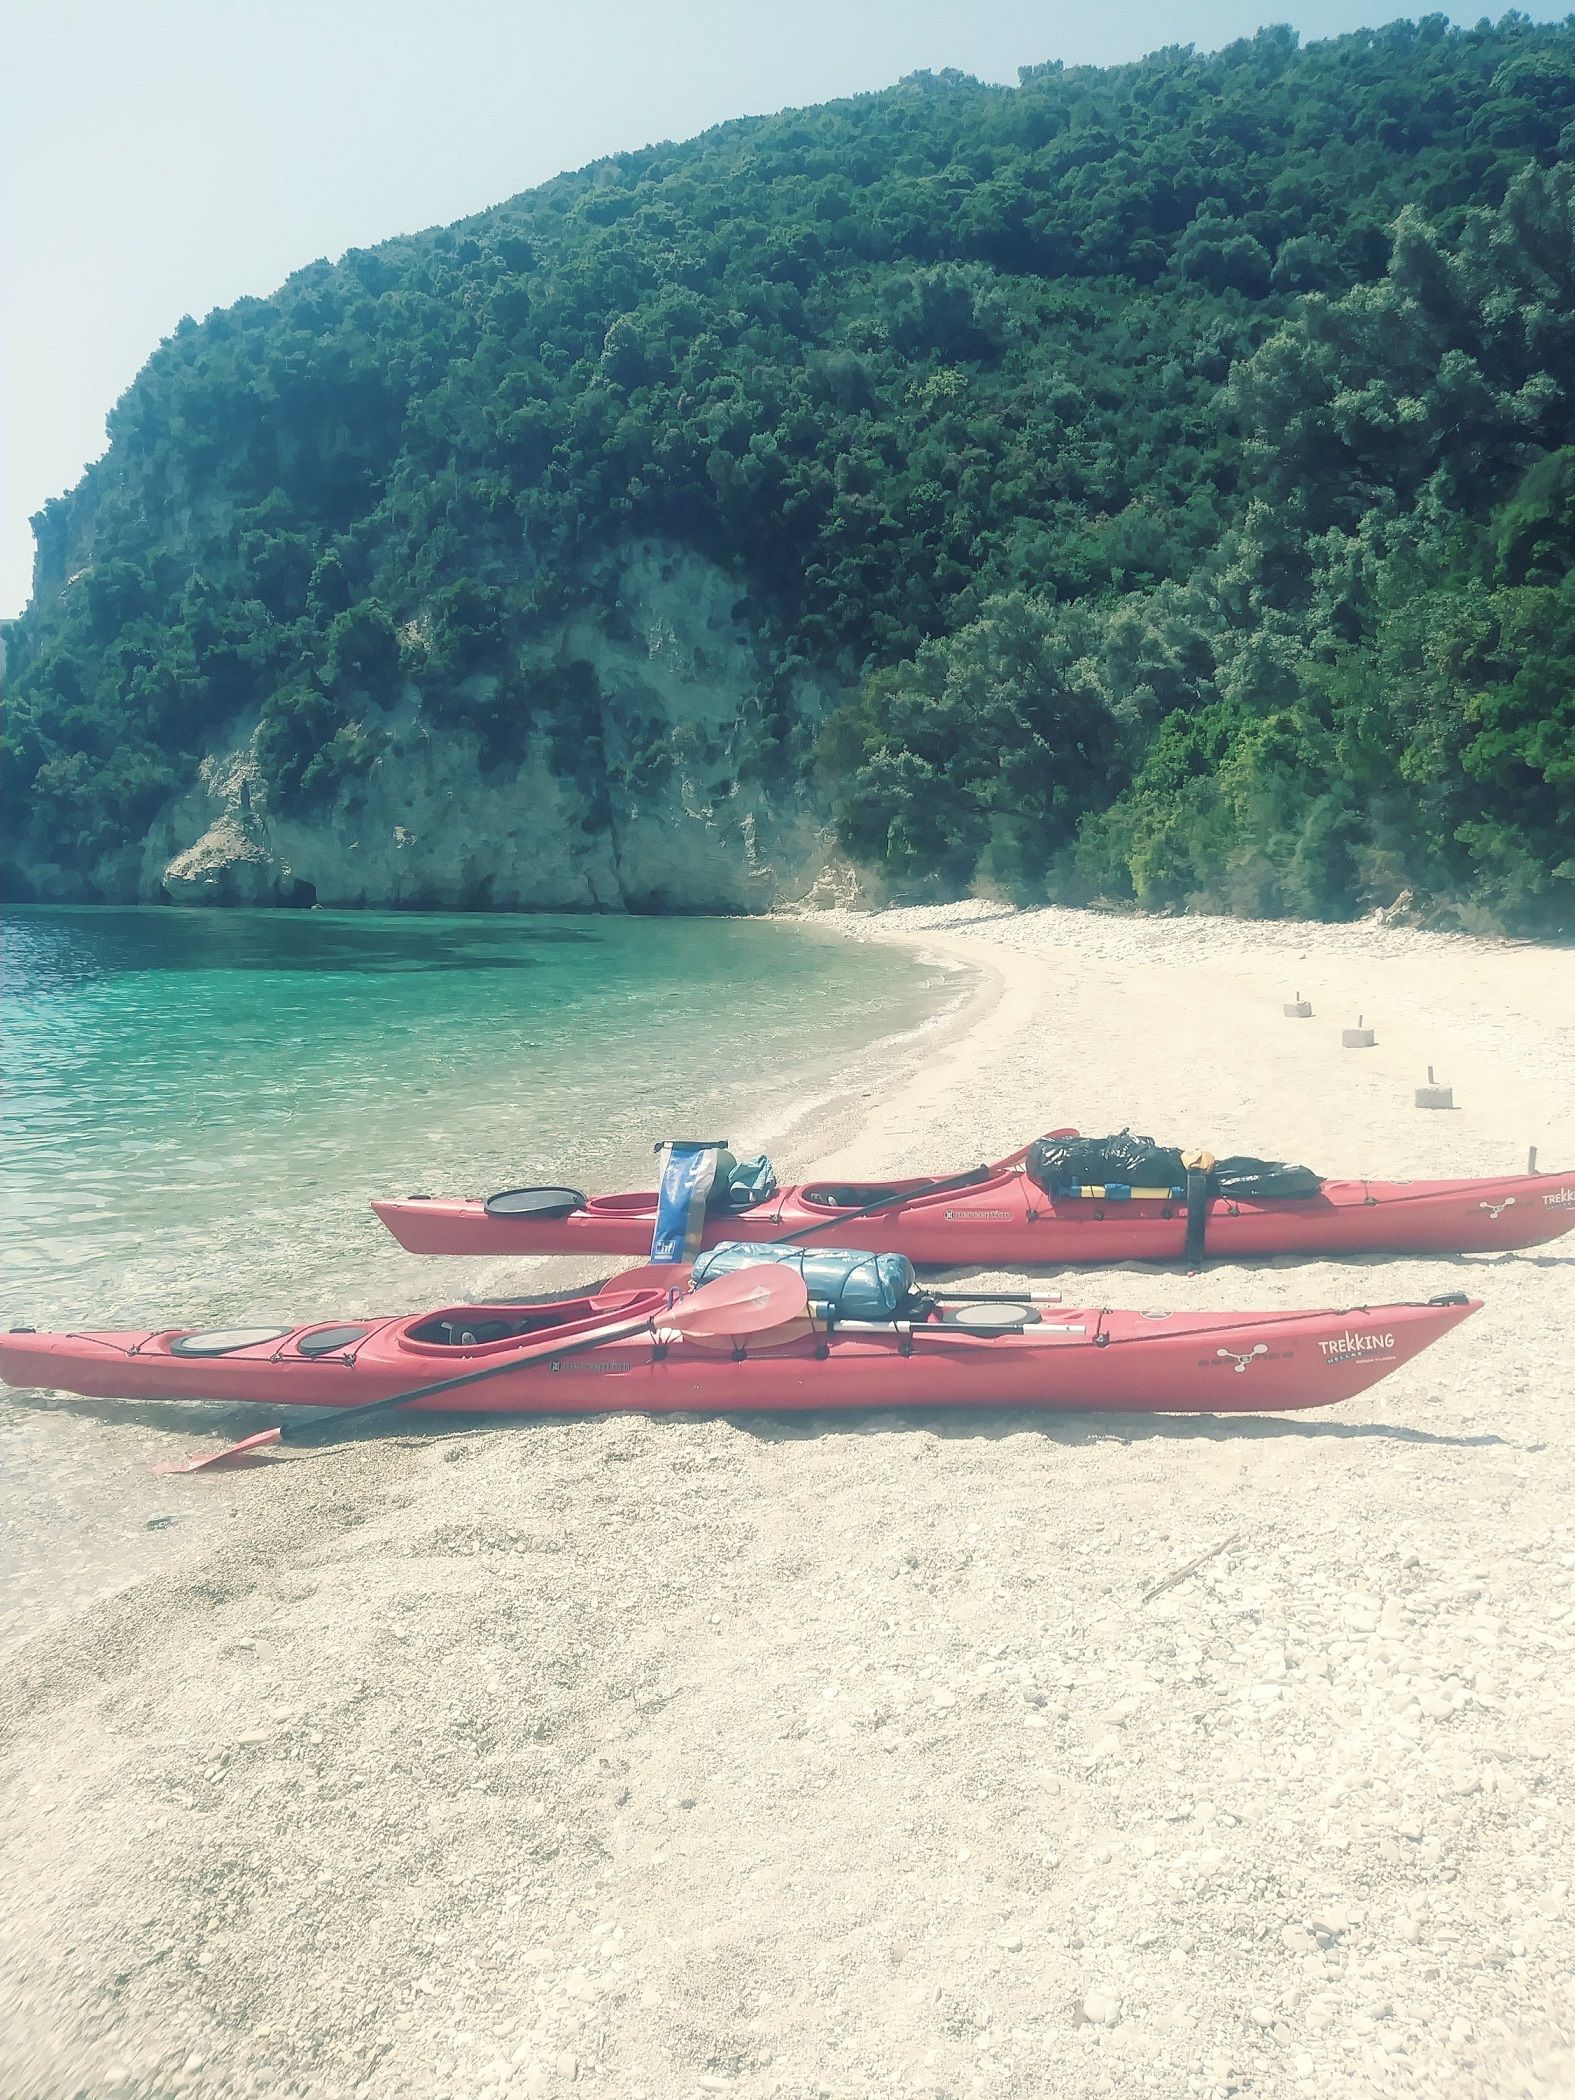 Sea kayaks pulled ashore on a deserted beach in Greece.